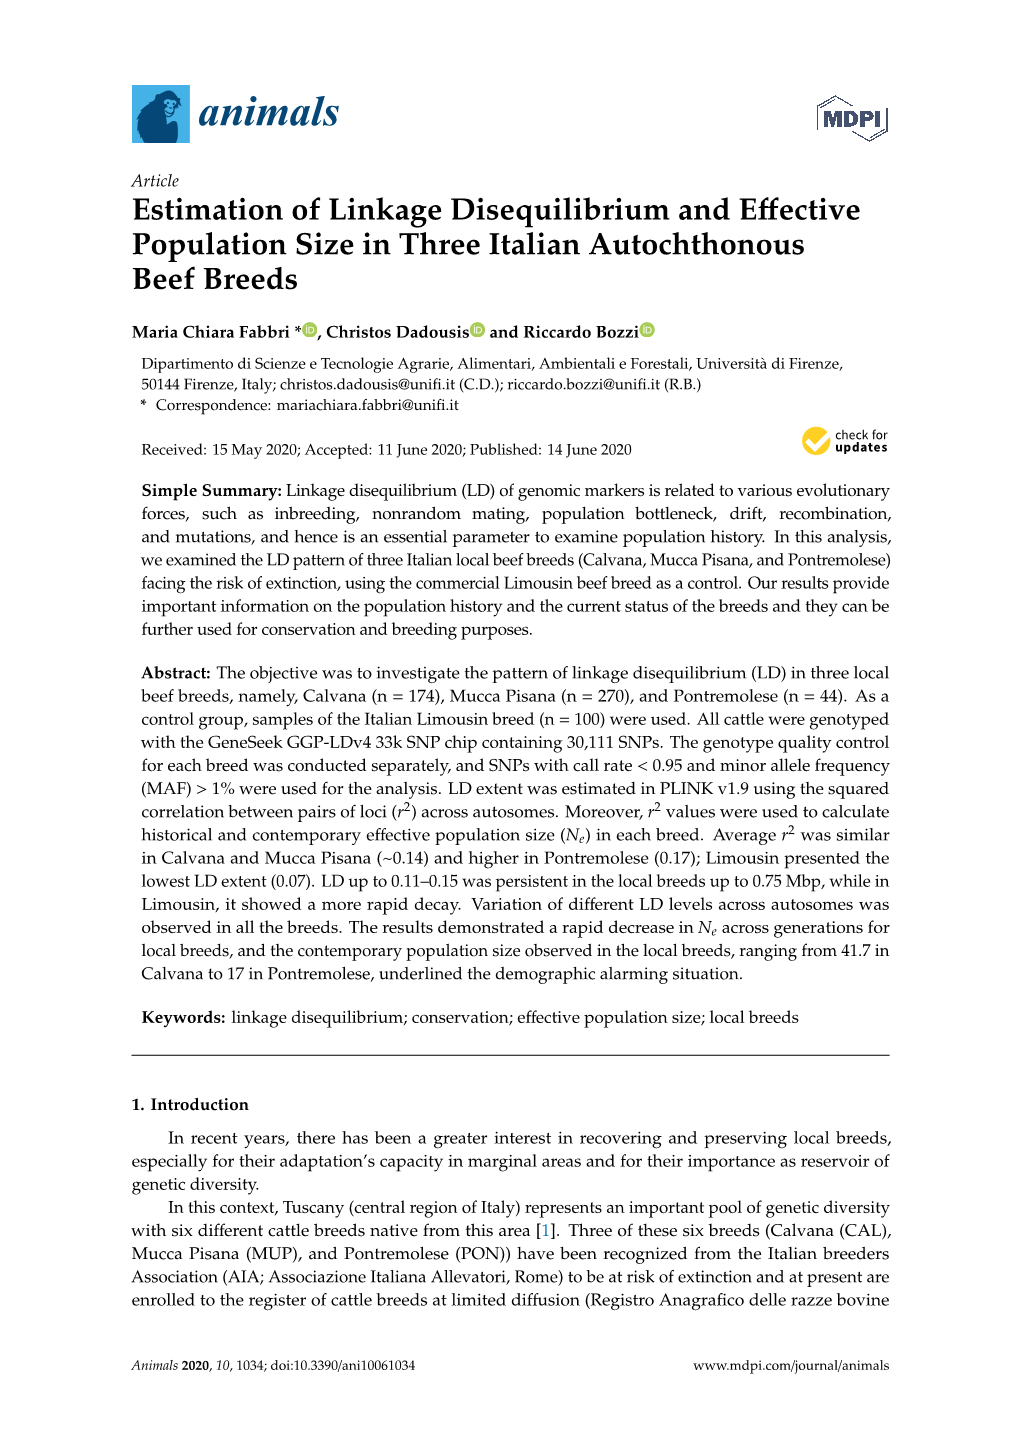 Estimation of Linkage Disequilibrium and Effective Population Size in Three Italian Autochthonous Beef Breeds